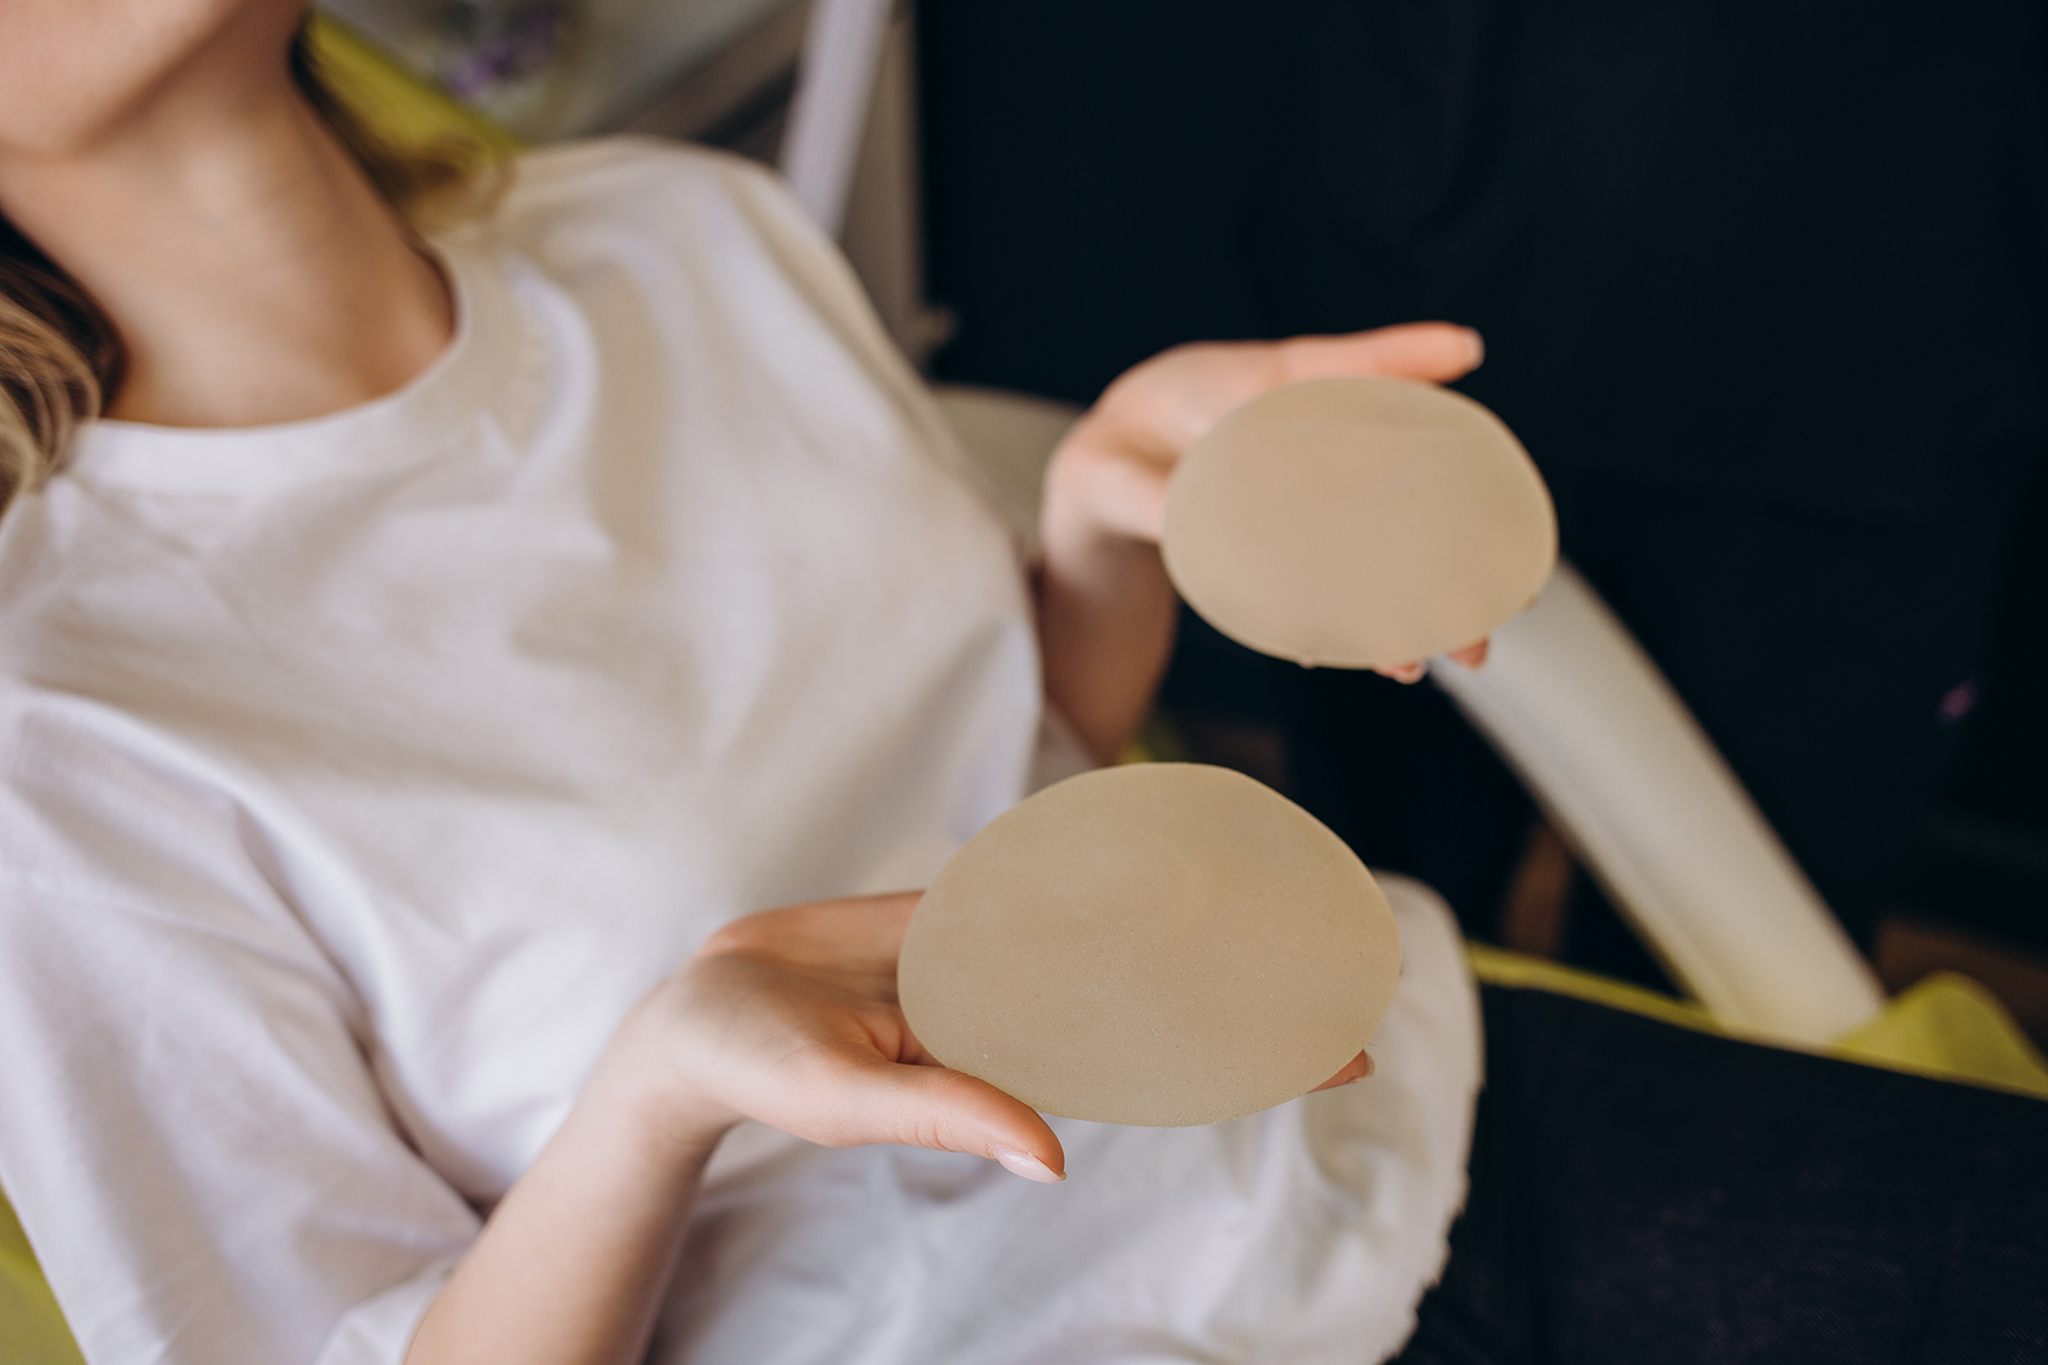 Cosmetic surgeon shows female patient breast implant samples for her future surgery